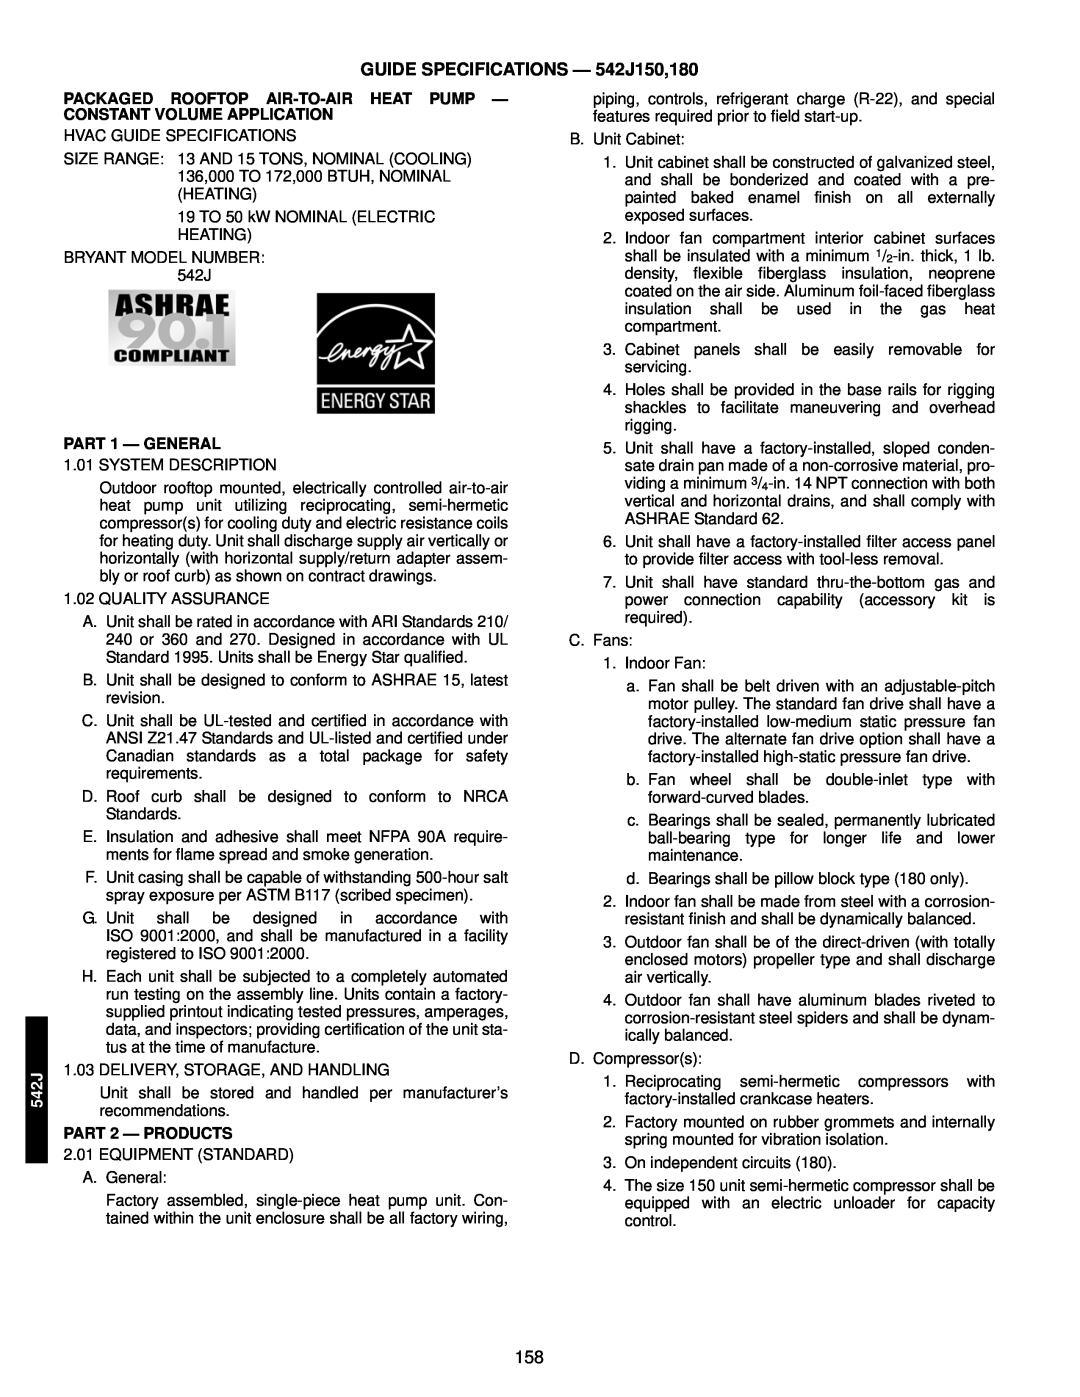 Bryant 549C manual GUIDE SPECIFICATIONS — 542J150,180, PART 1 — GENERAL, PART 2 - PRODUCTS 